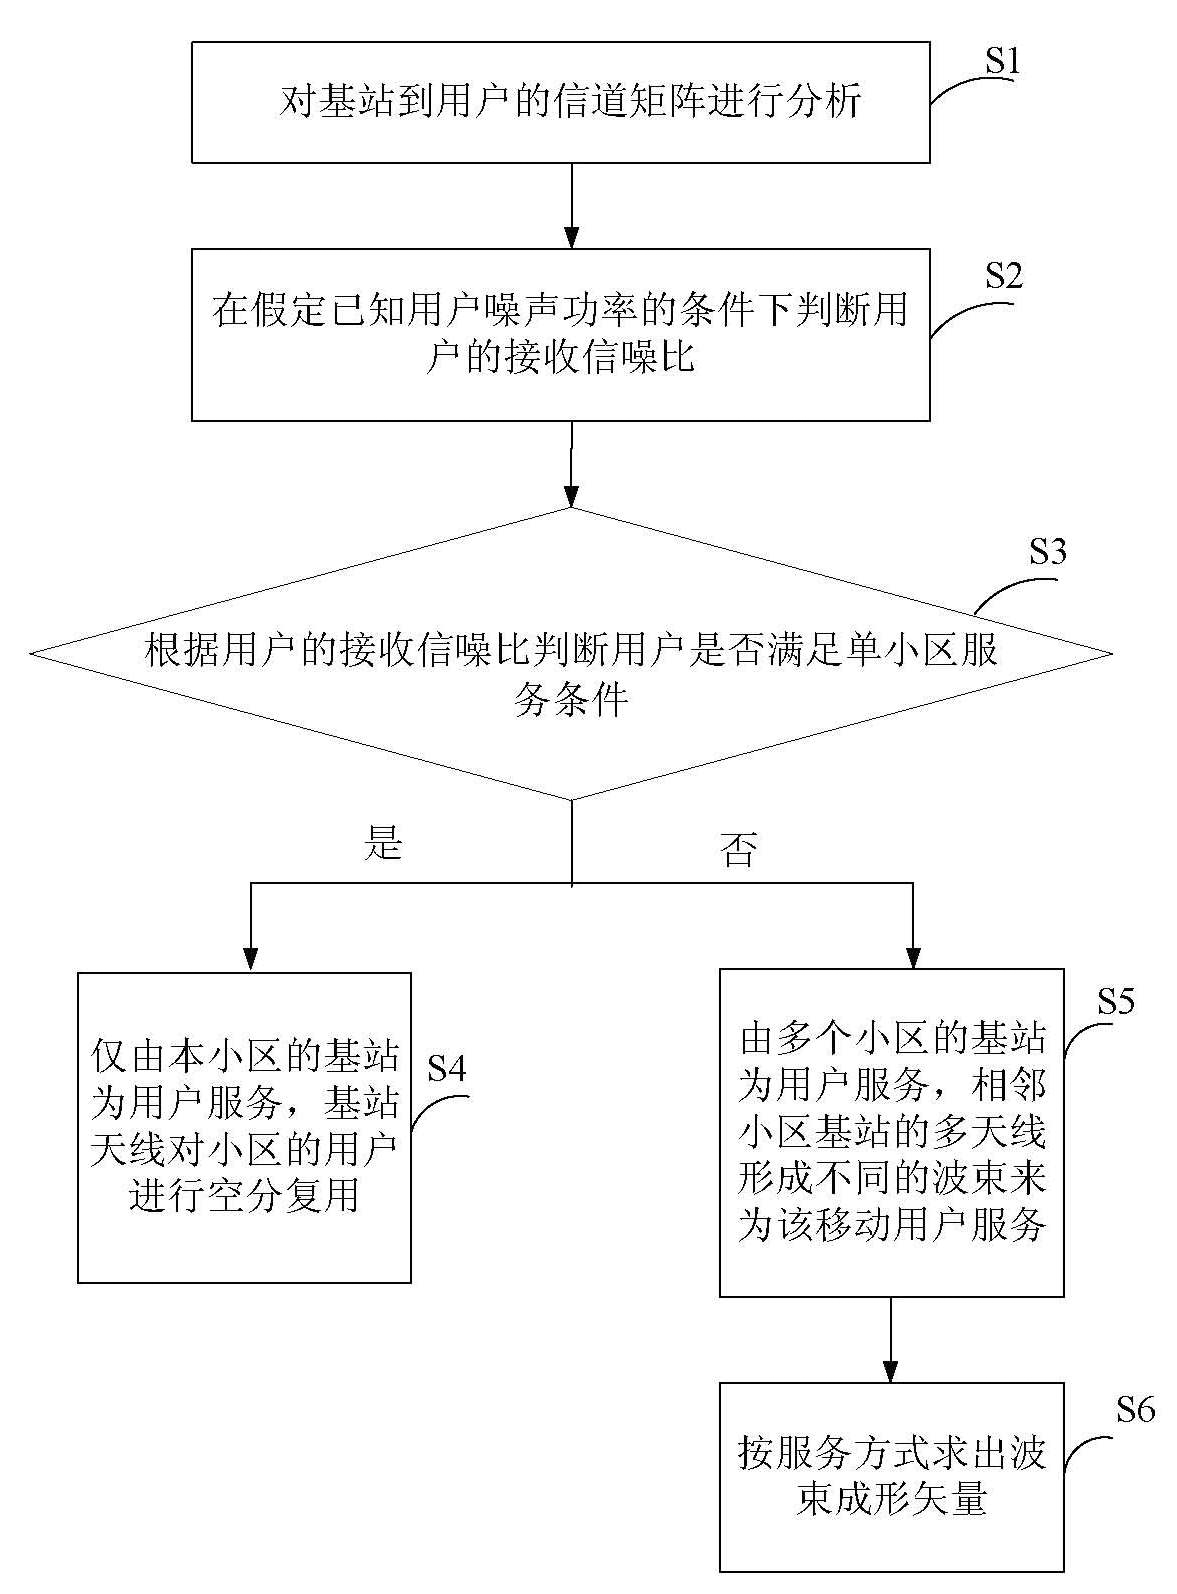 Method for eliminating shadow region of mobile subscriber by using multiple antennae of multiple base station terminals